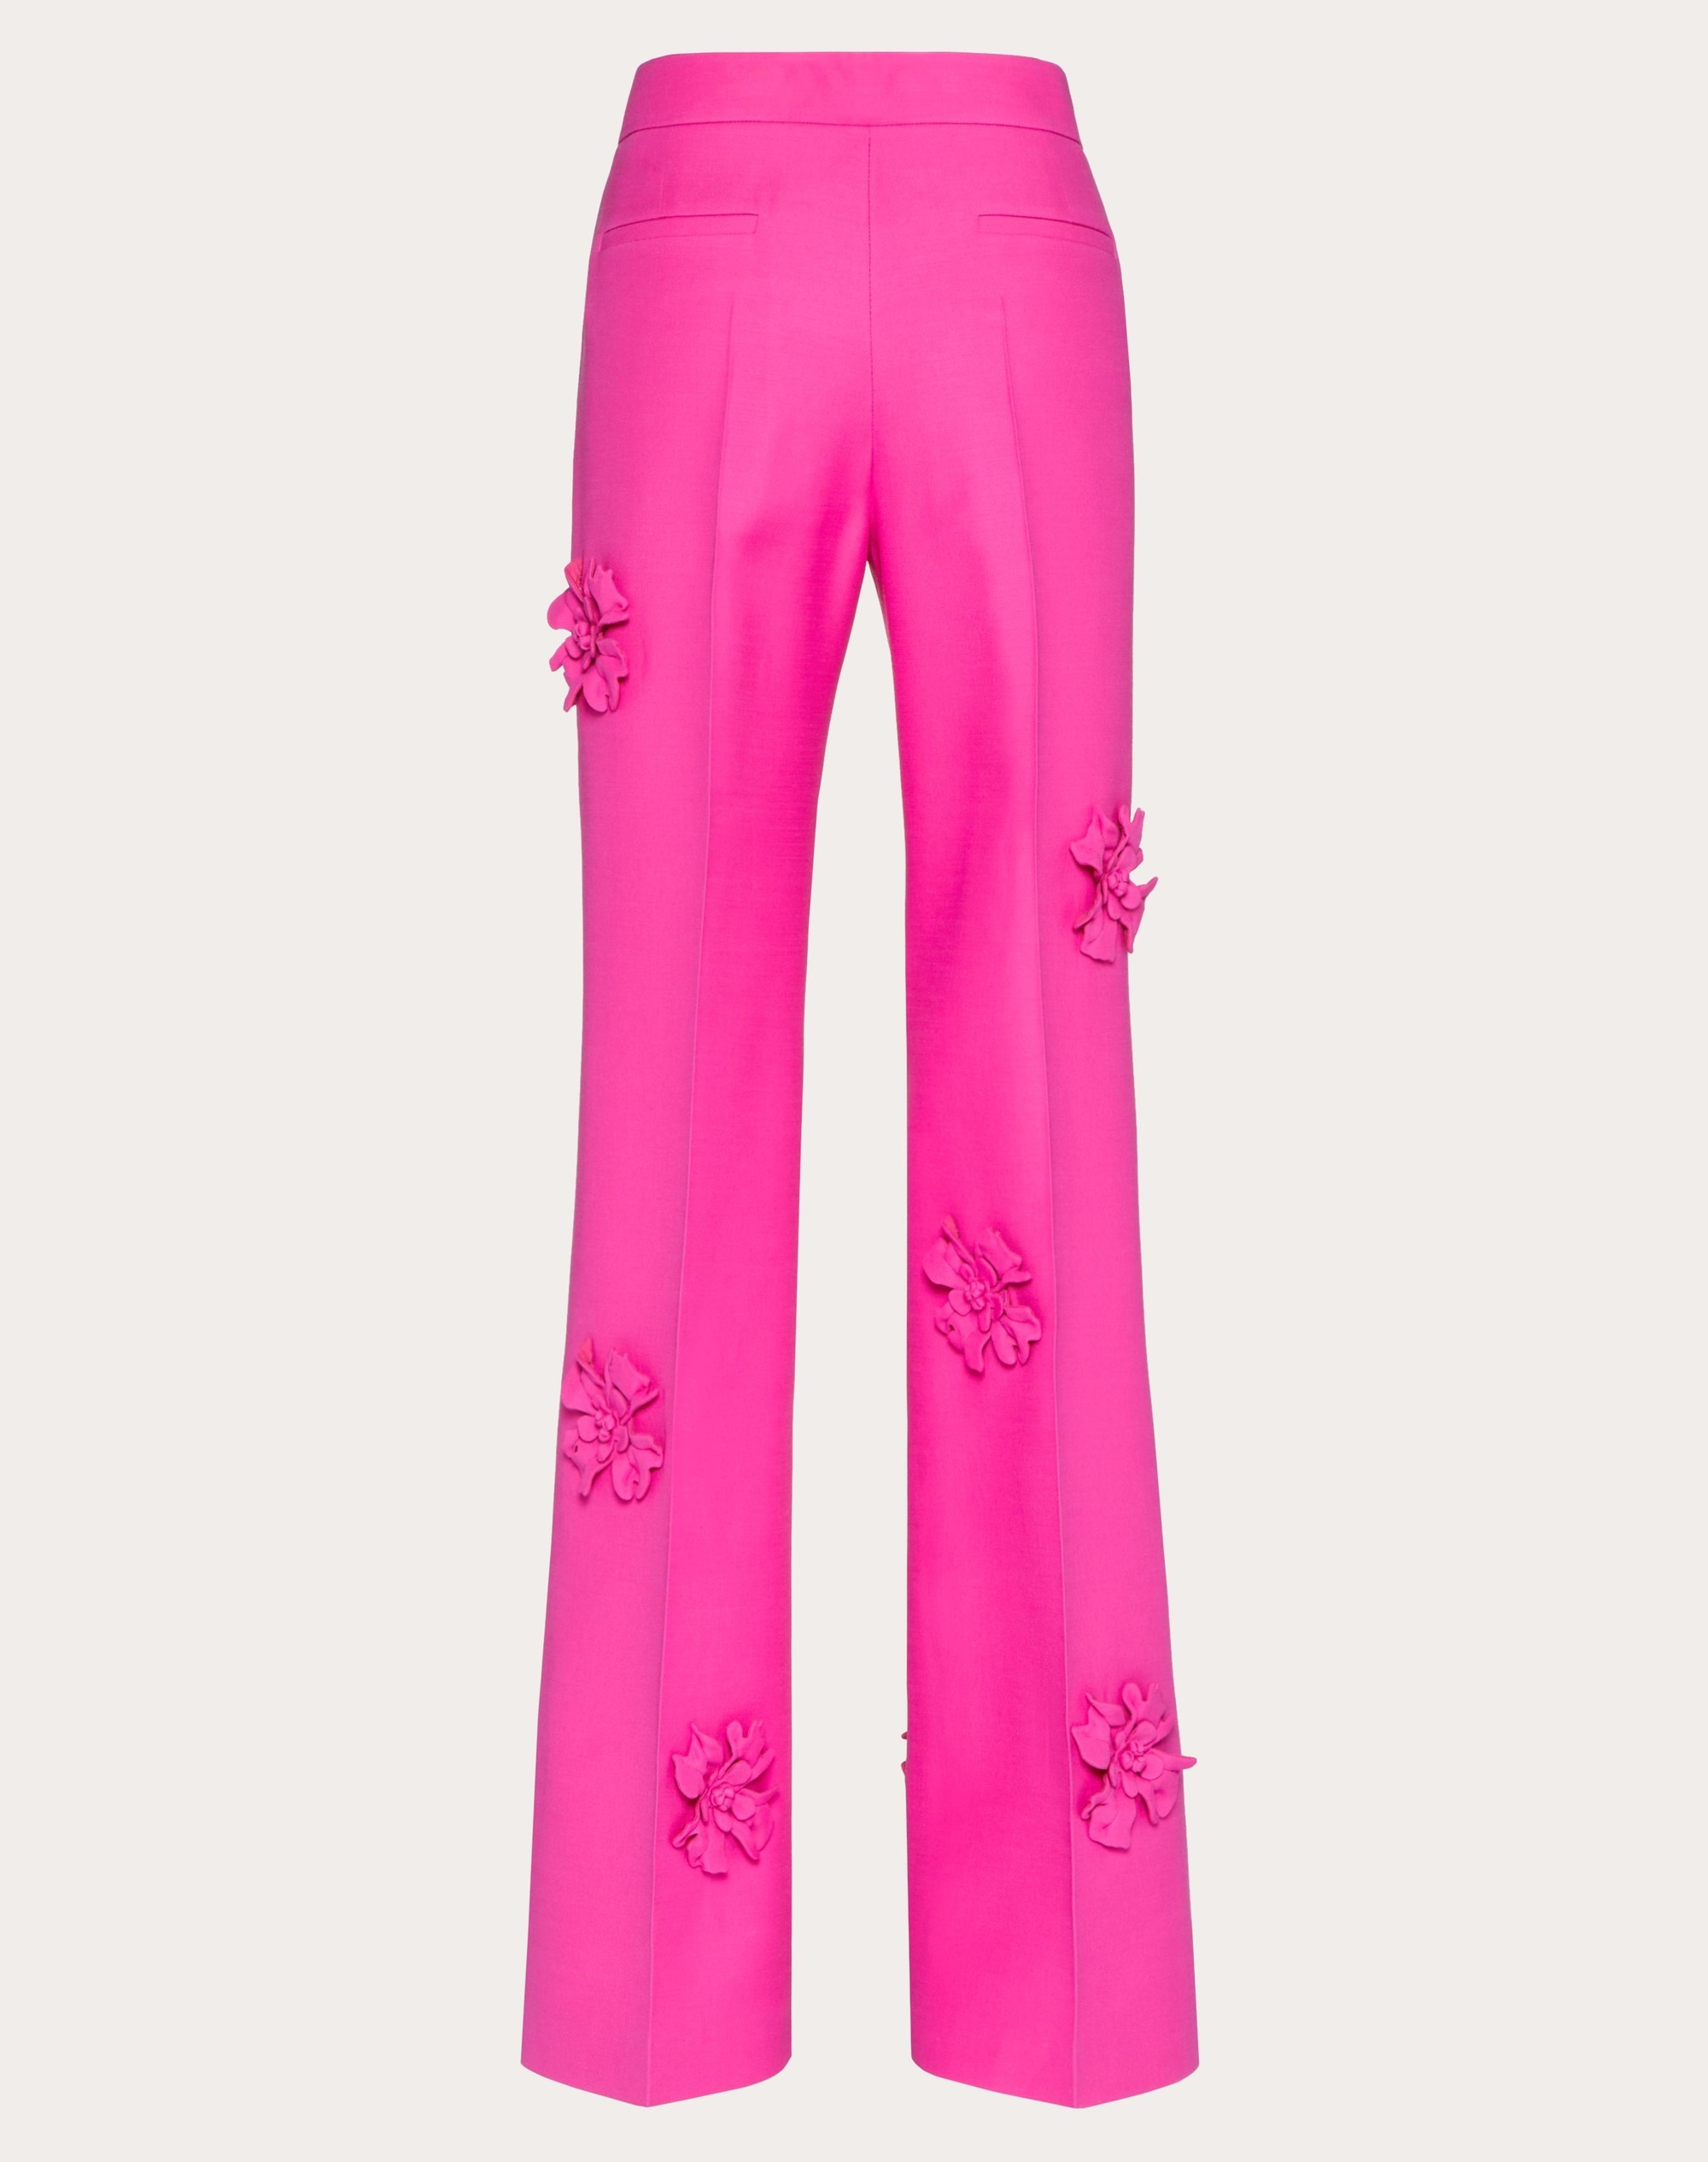 CREPE COUTURE TROUSERS WITH FLORAL EMBROIDERY - 4